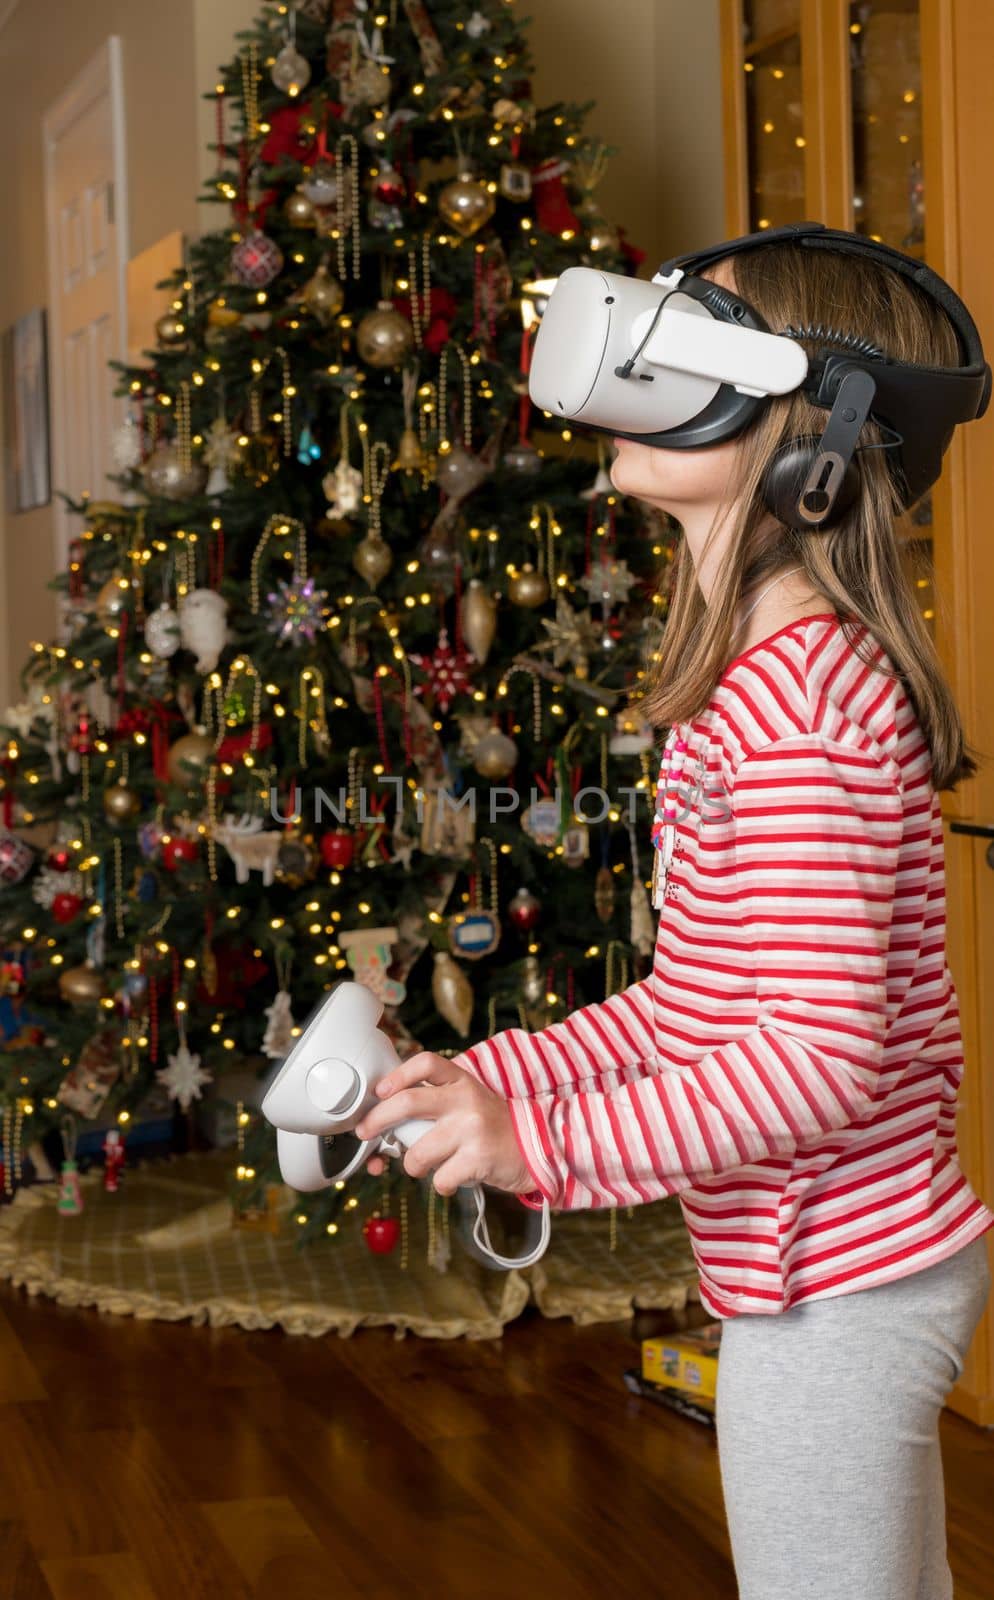 Young girl playing a game on a modern VR headset by steheap